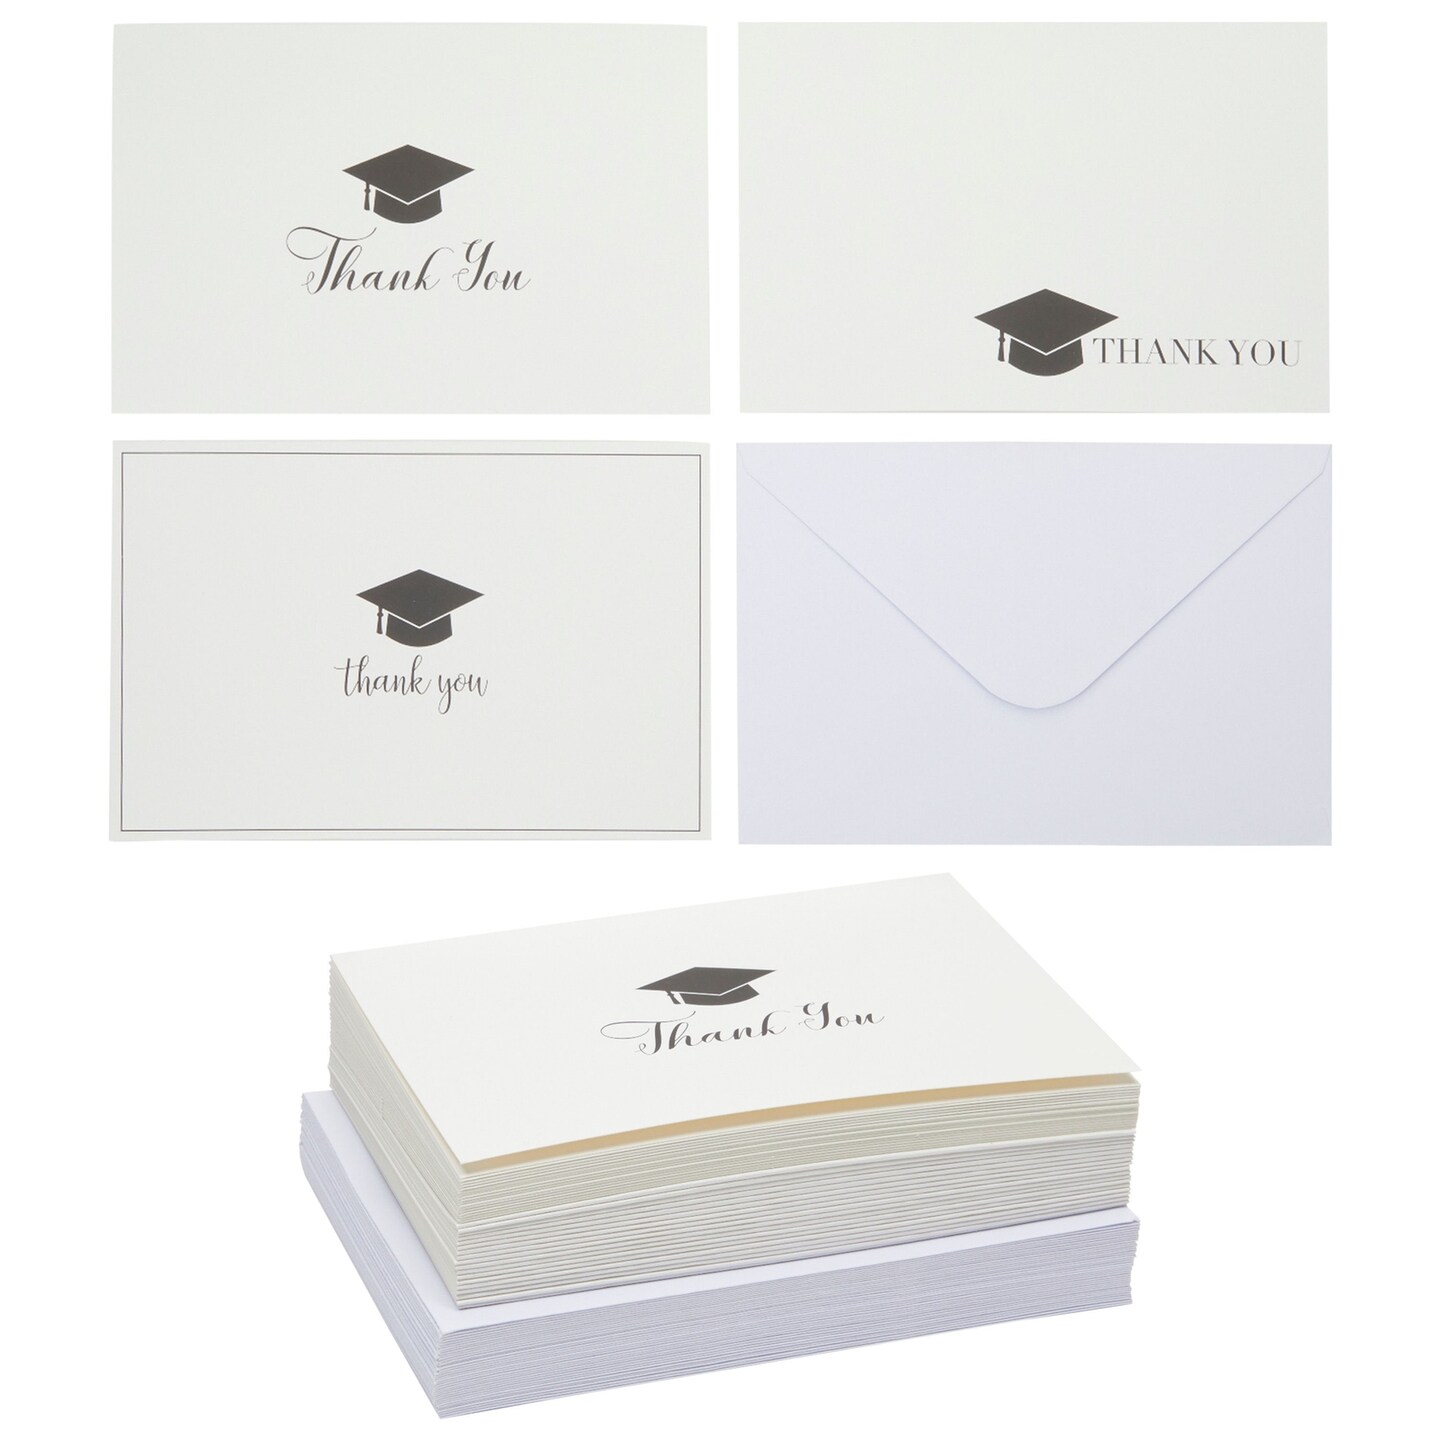 graduation thank you messages for cards